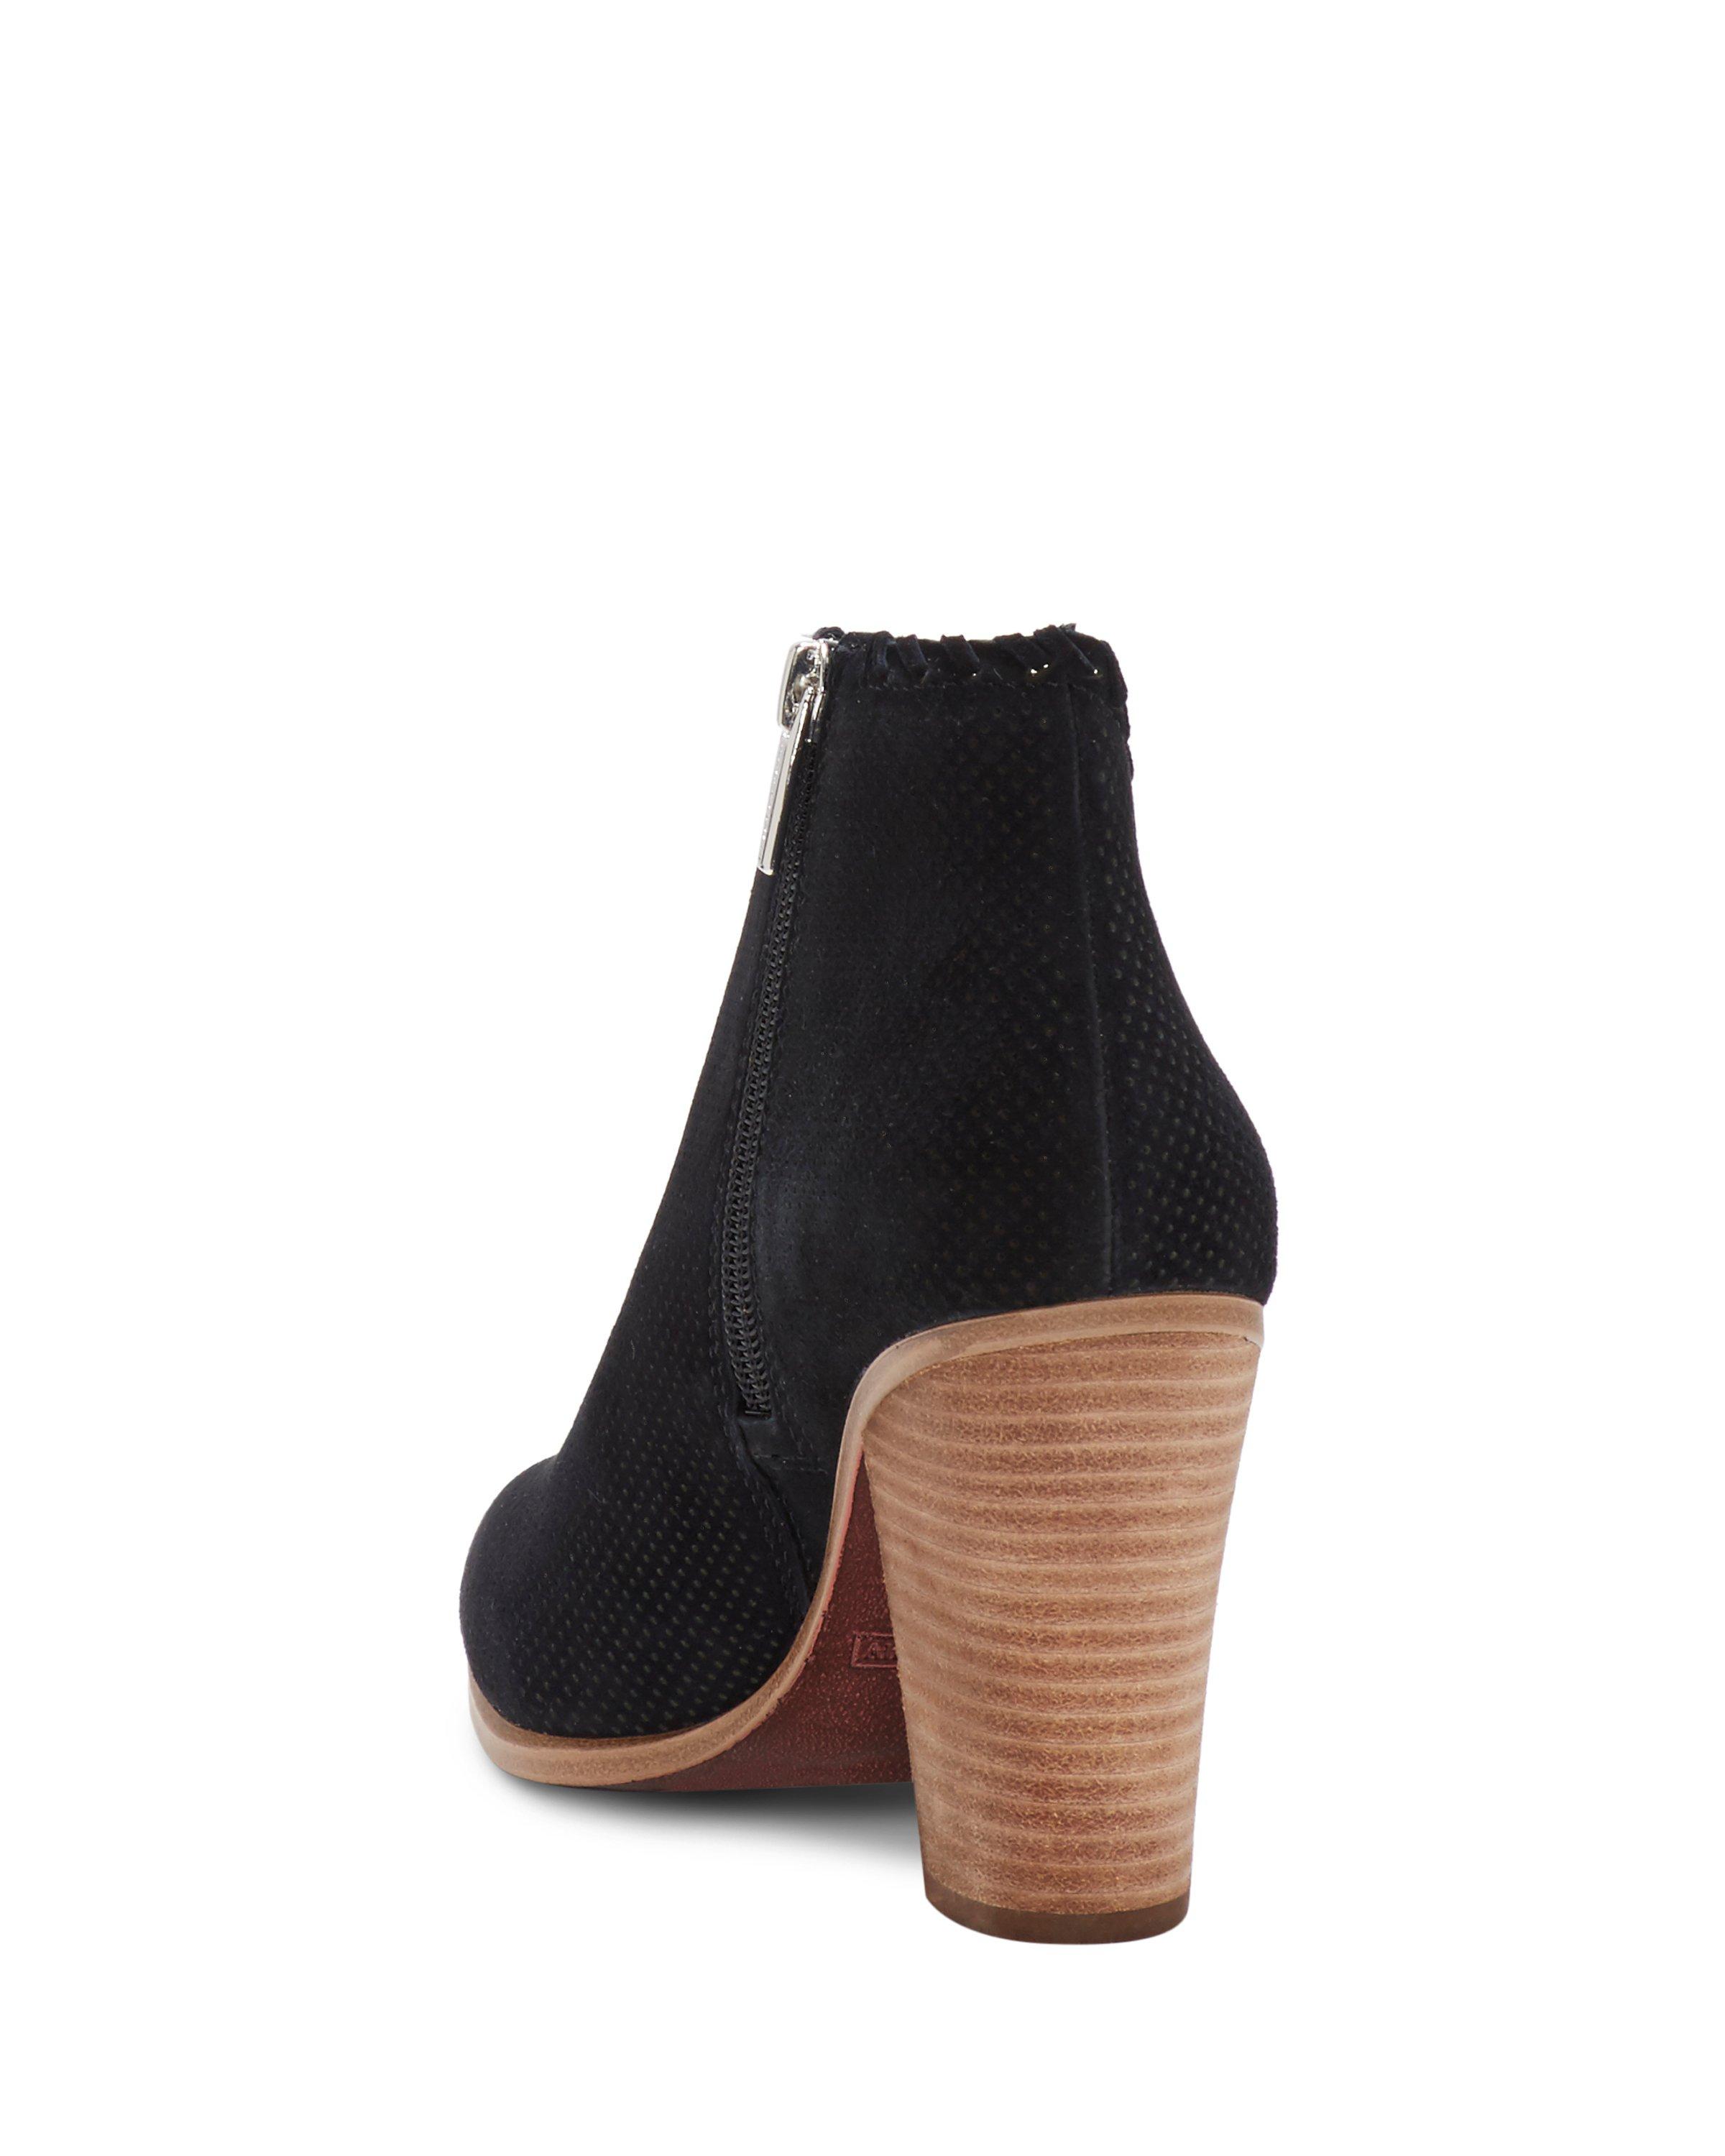 vince camuto fernlee bootie